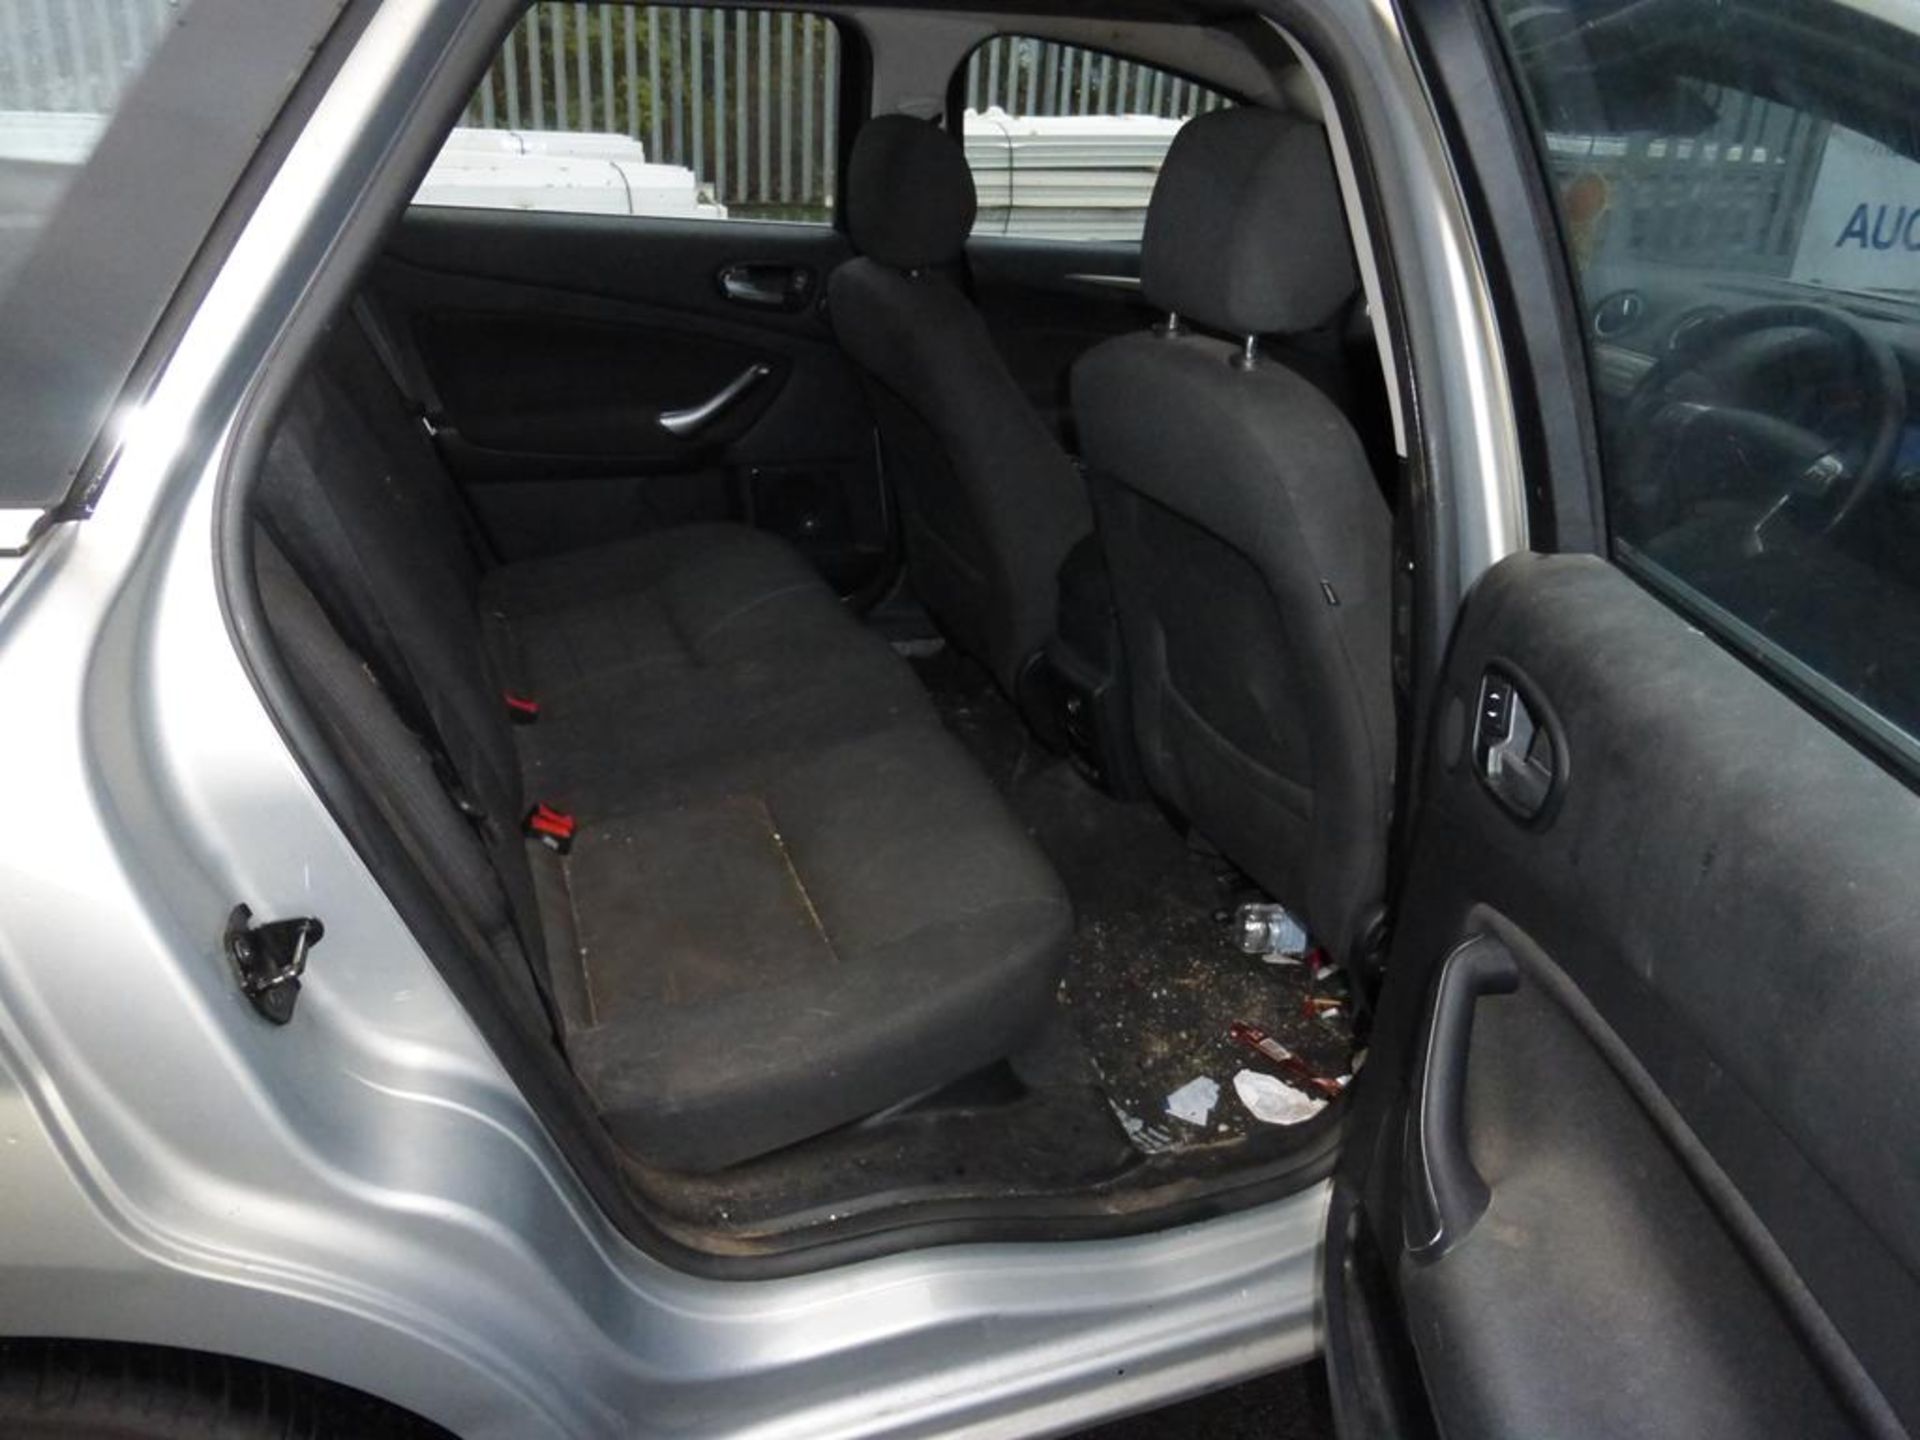 2010 Ford Mondeo Titanium 1997cc Diesel, 5 Door Estate, fitted with Tow Bar, Registration YP10 - Image 11 of 12